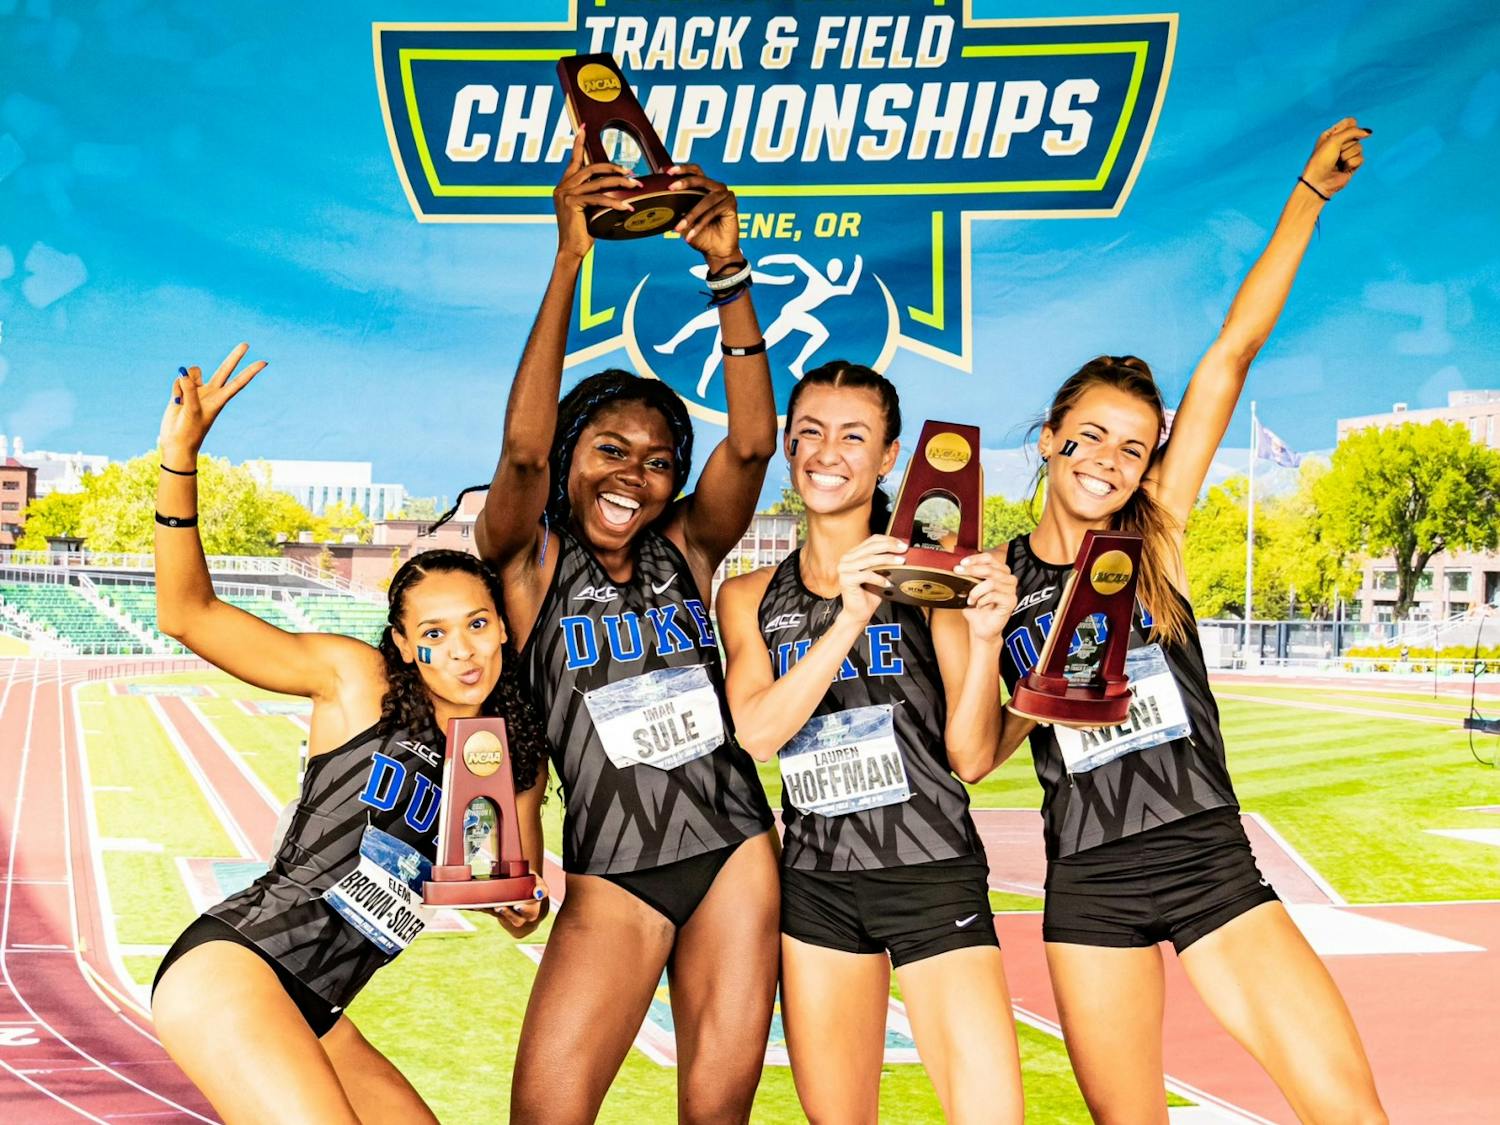 Elena Brown-Soler, Iman Sule, Lauren Hoffman and Brittany Aveni broke the school record and finished seventh in the 4x400m relay at the NCAA Outdoor Championships.